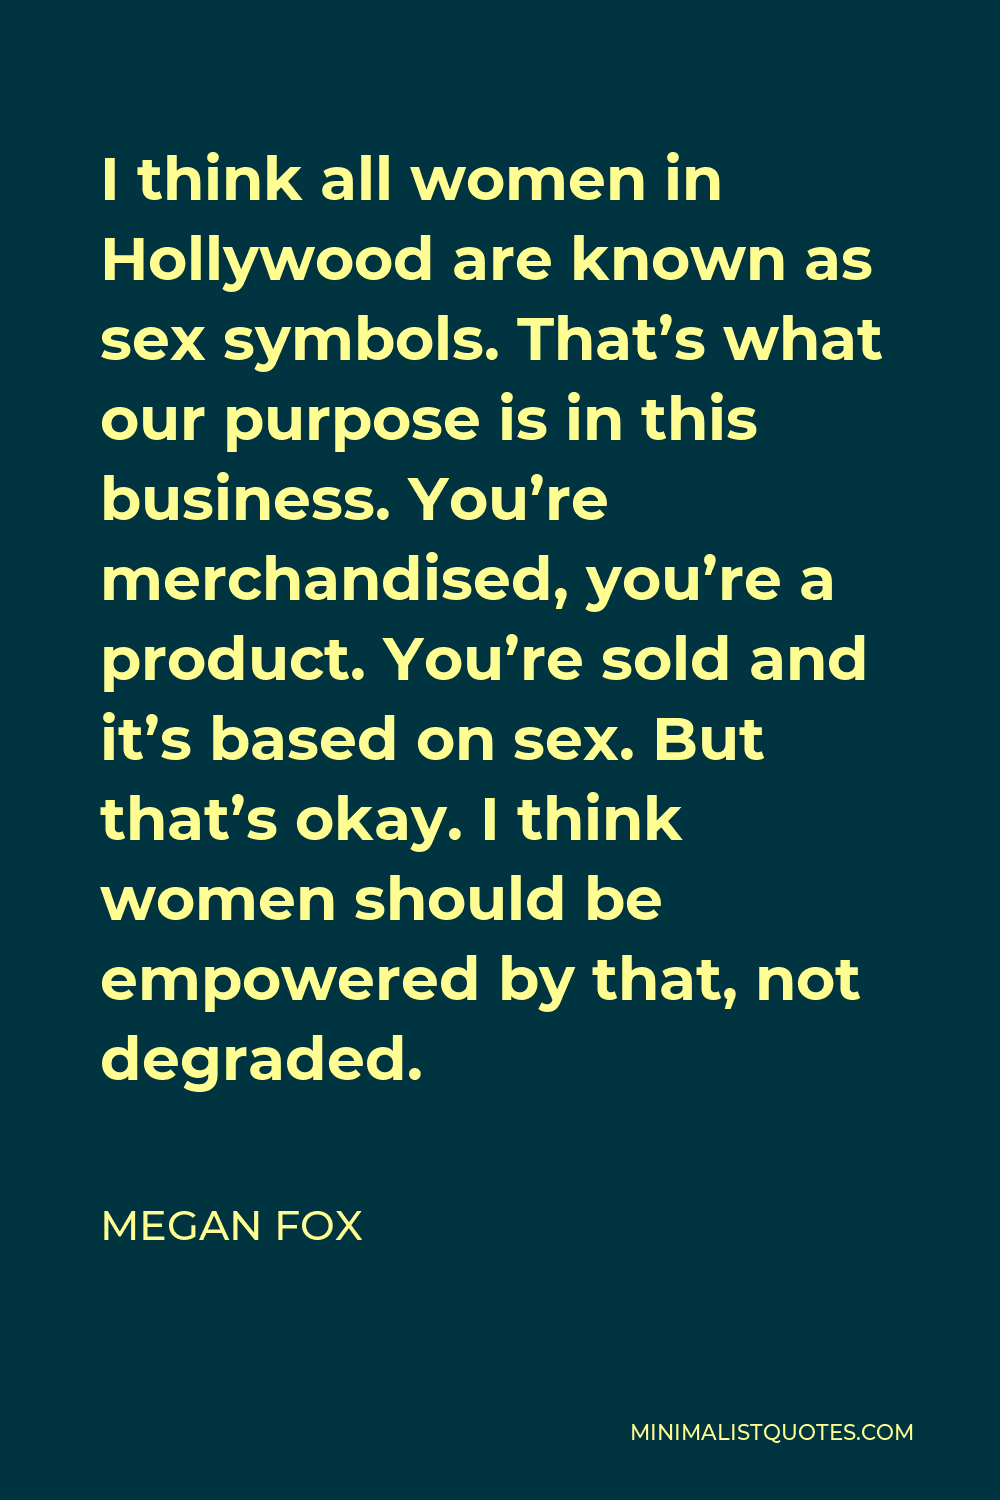 Megan Fox Quote - I think all women in Hollywood are known as sex symbols. That’s what our purpose is in this business. You’re merchandised, you’re a product. You’re sold and it’s based on sex. But that’s okay. I think women should be empowered by that, not degraded.